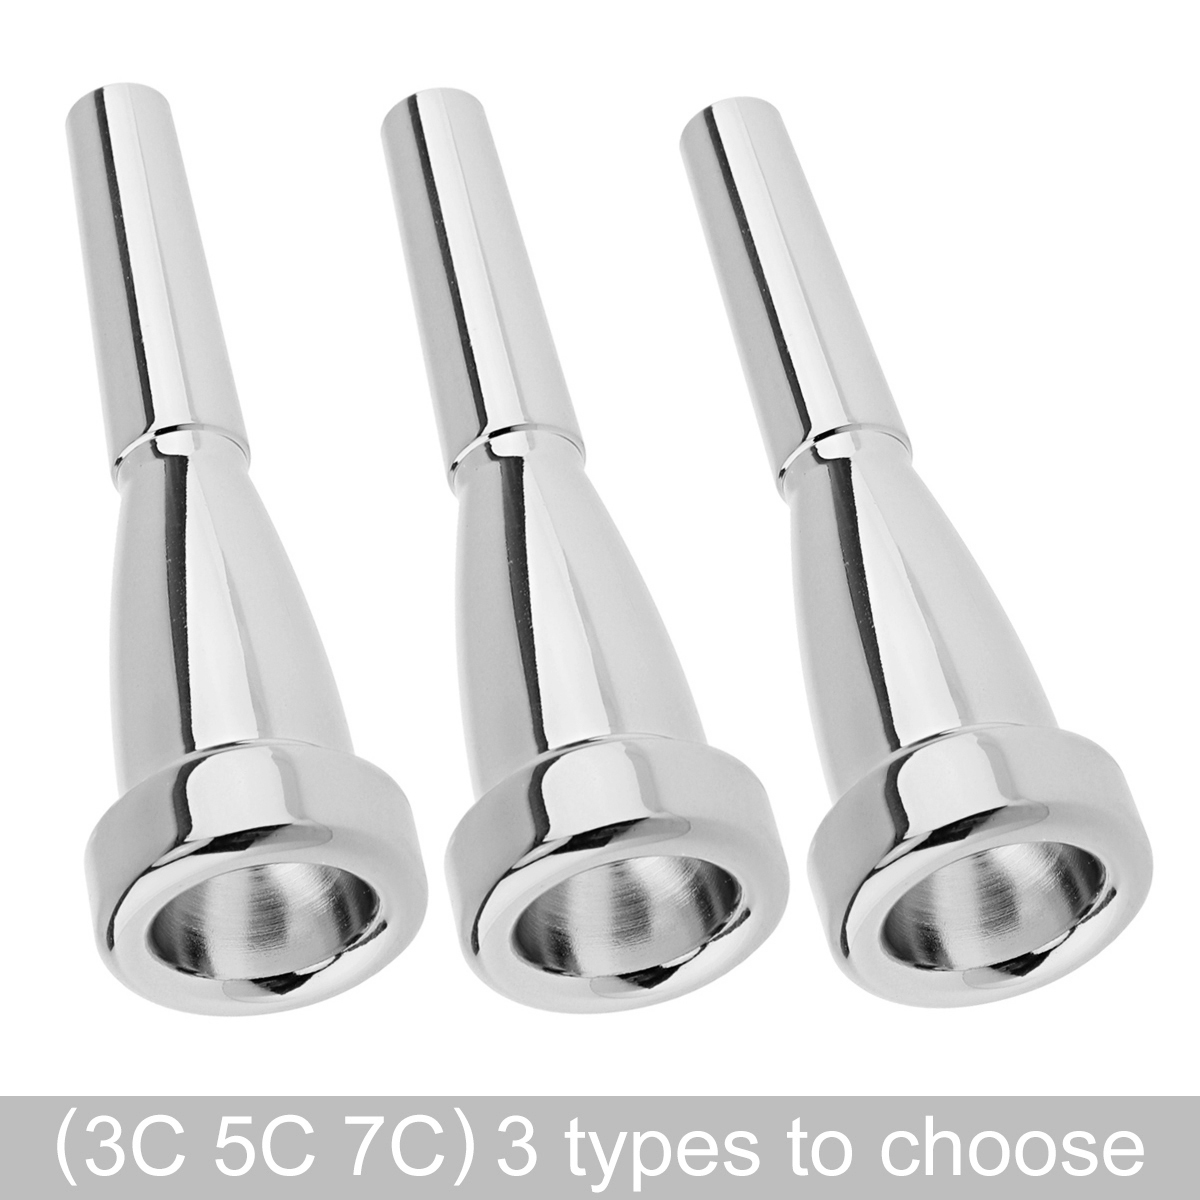 3C 5C 7C Silver High-quality Copper Alloy Plated Metal Trumpet Mouthpiece Bullet Shape for Yamaha Bach Conn and King Trumpets